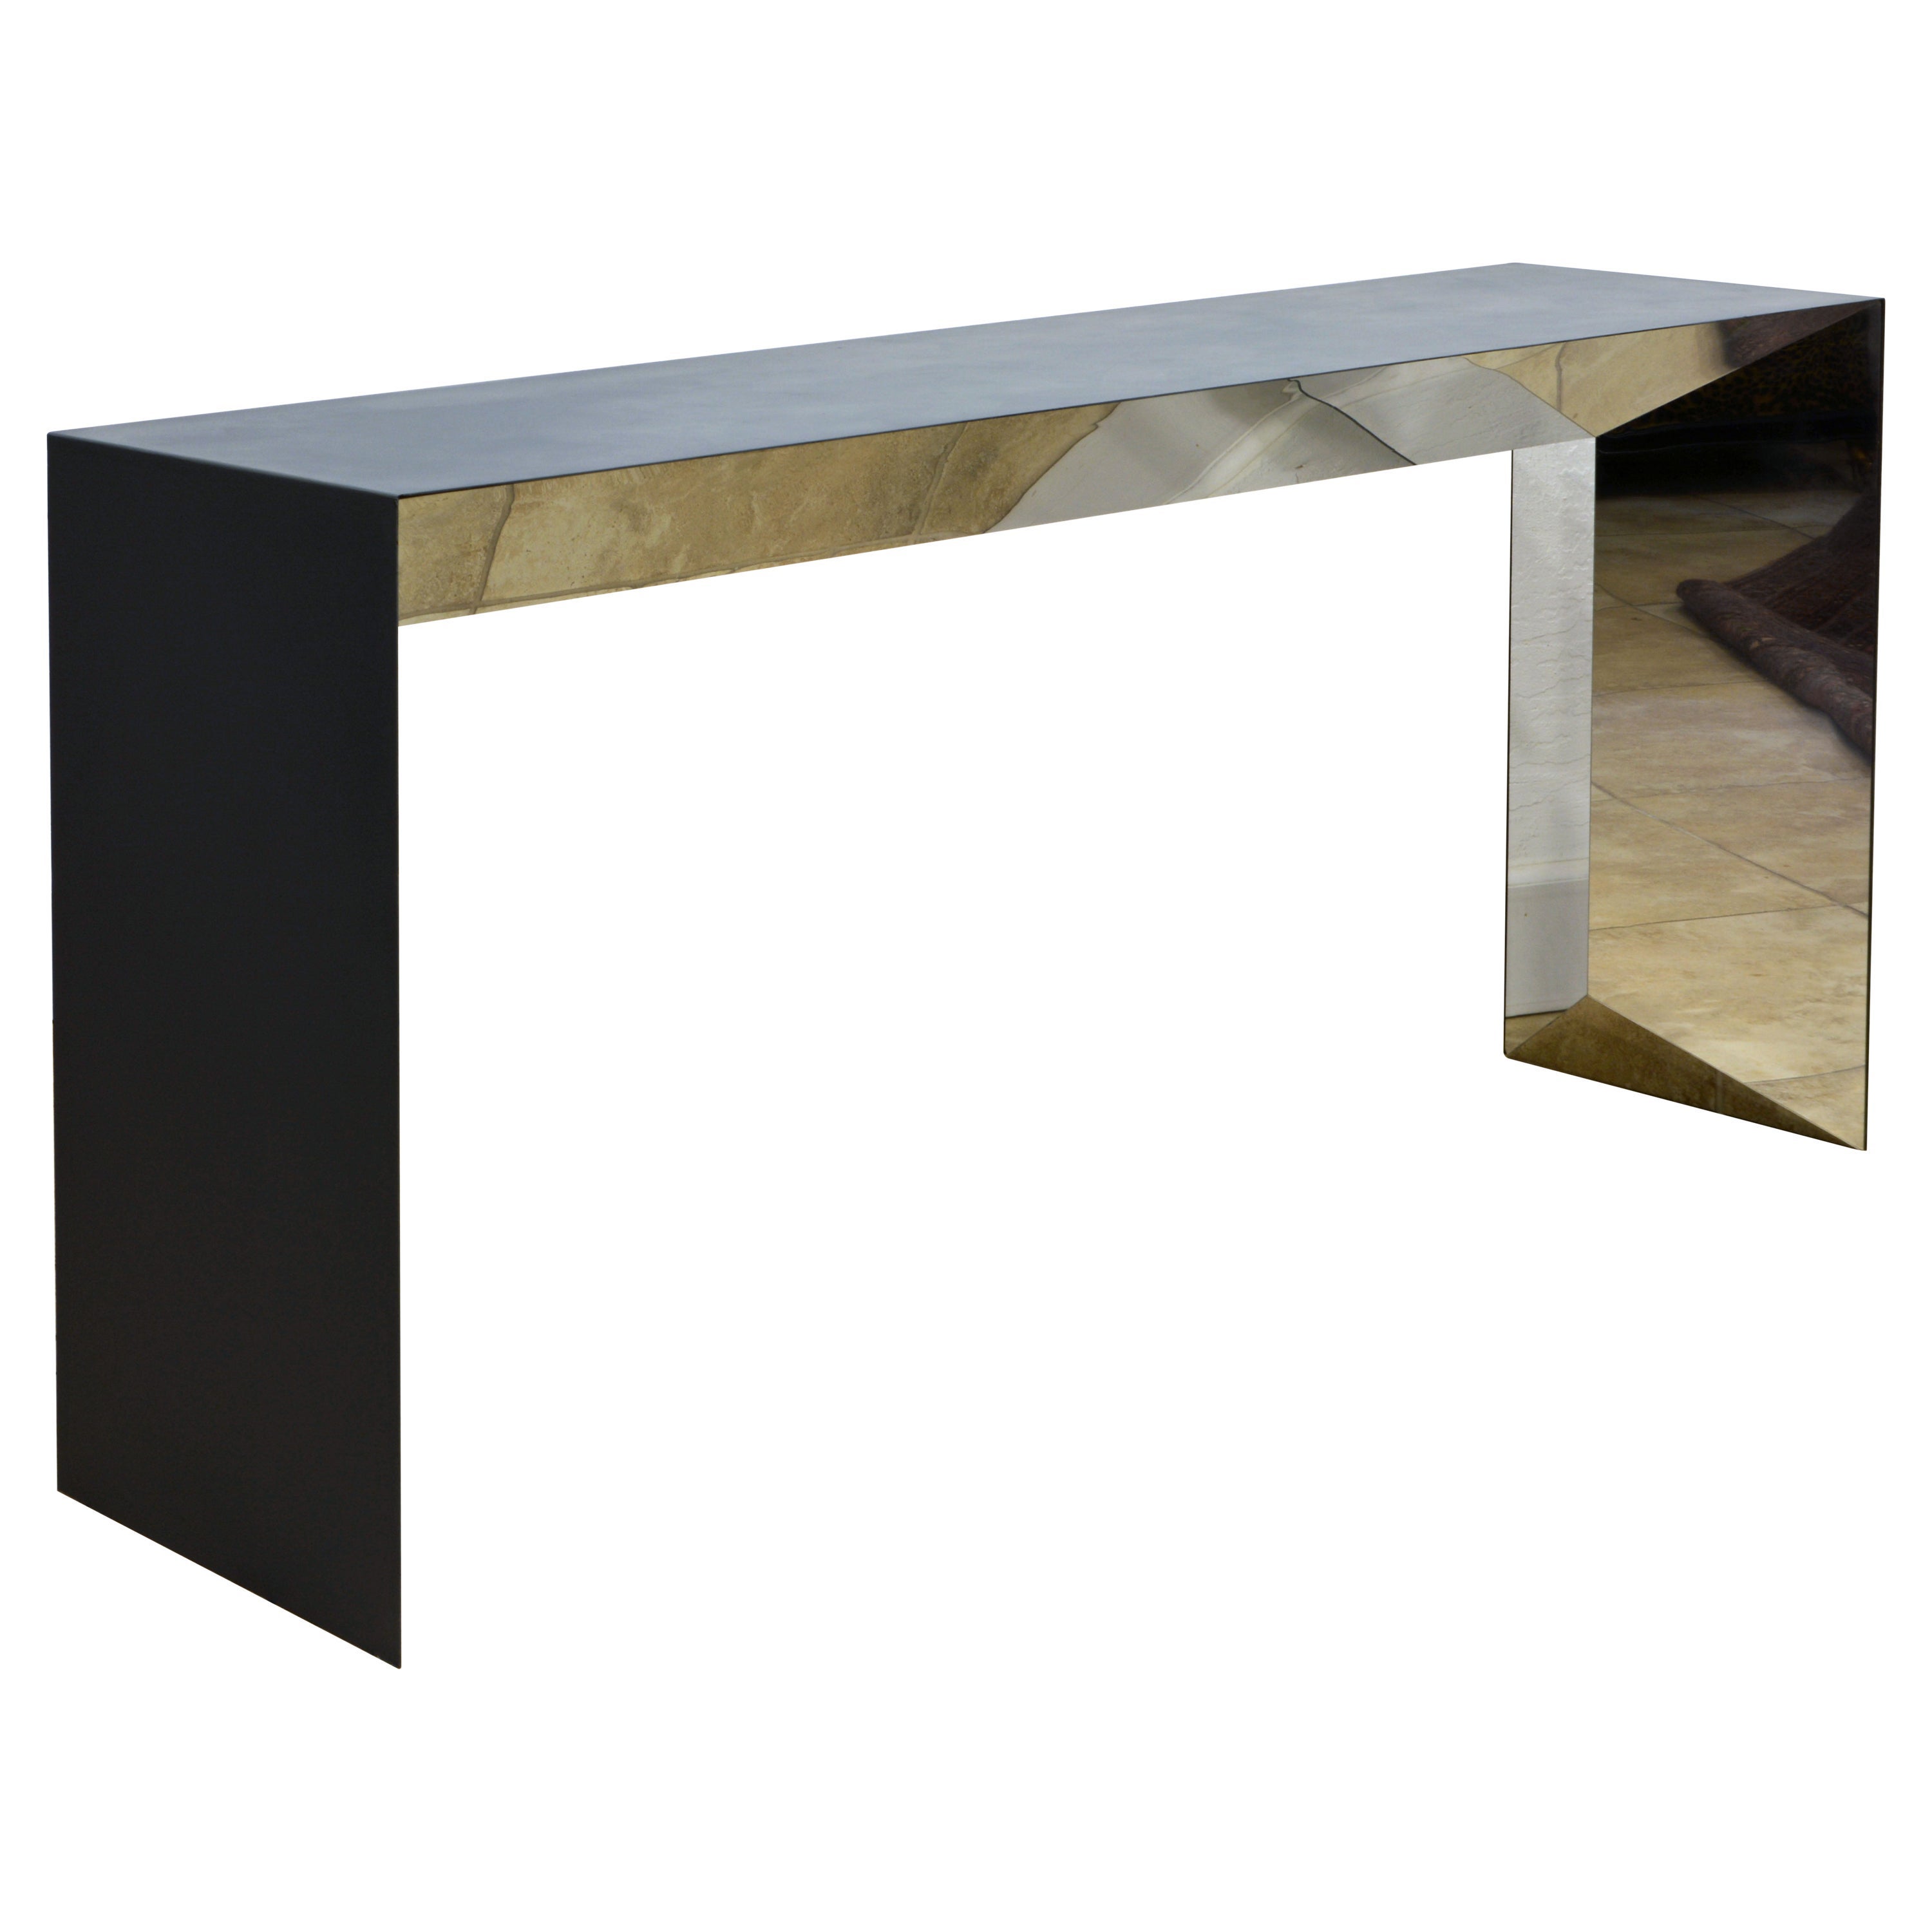 Unique Mid-Century Modern Steel and Prismatic Chrome Structure Console Table